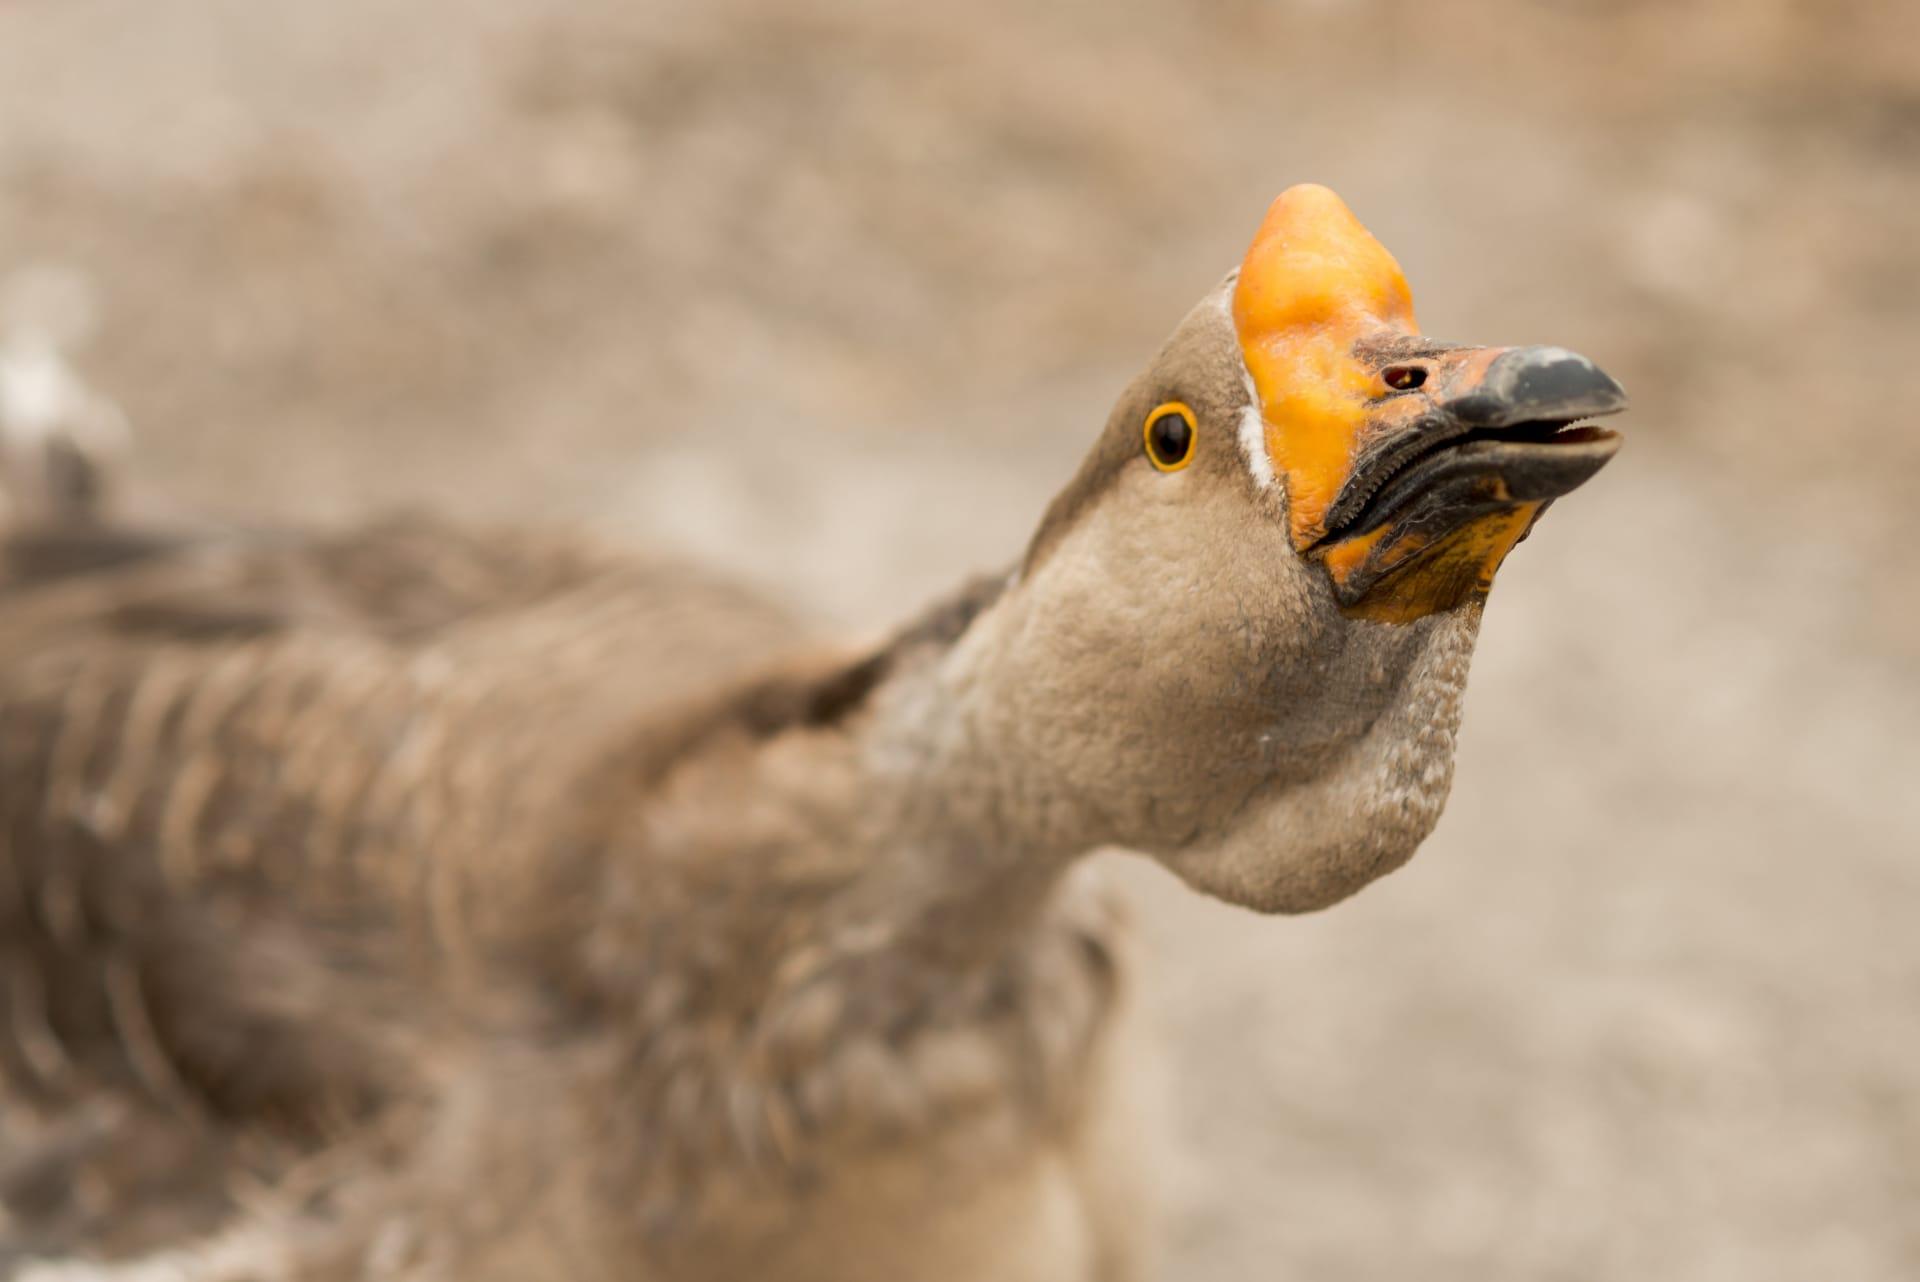 Goose pictures